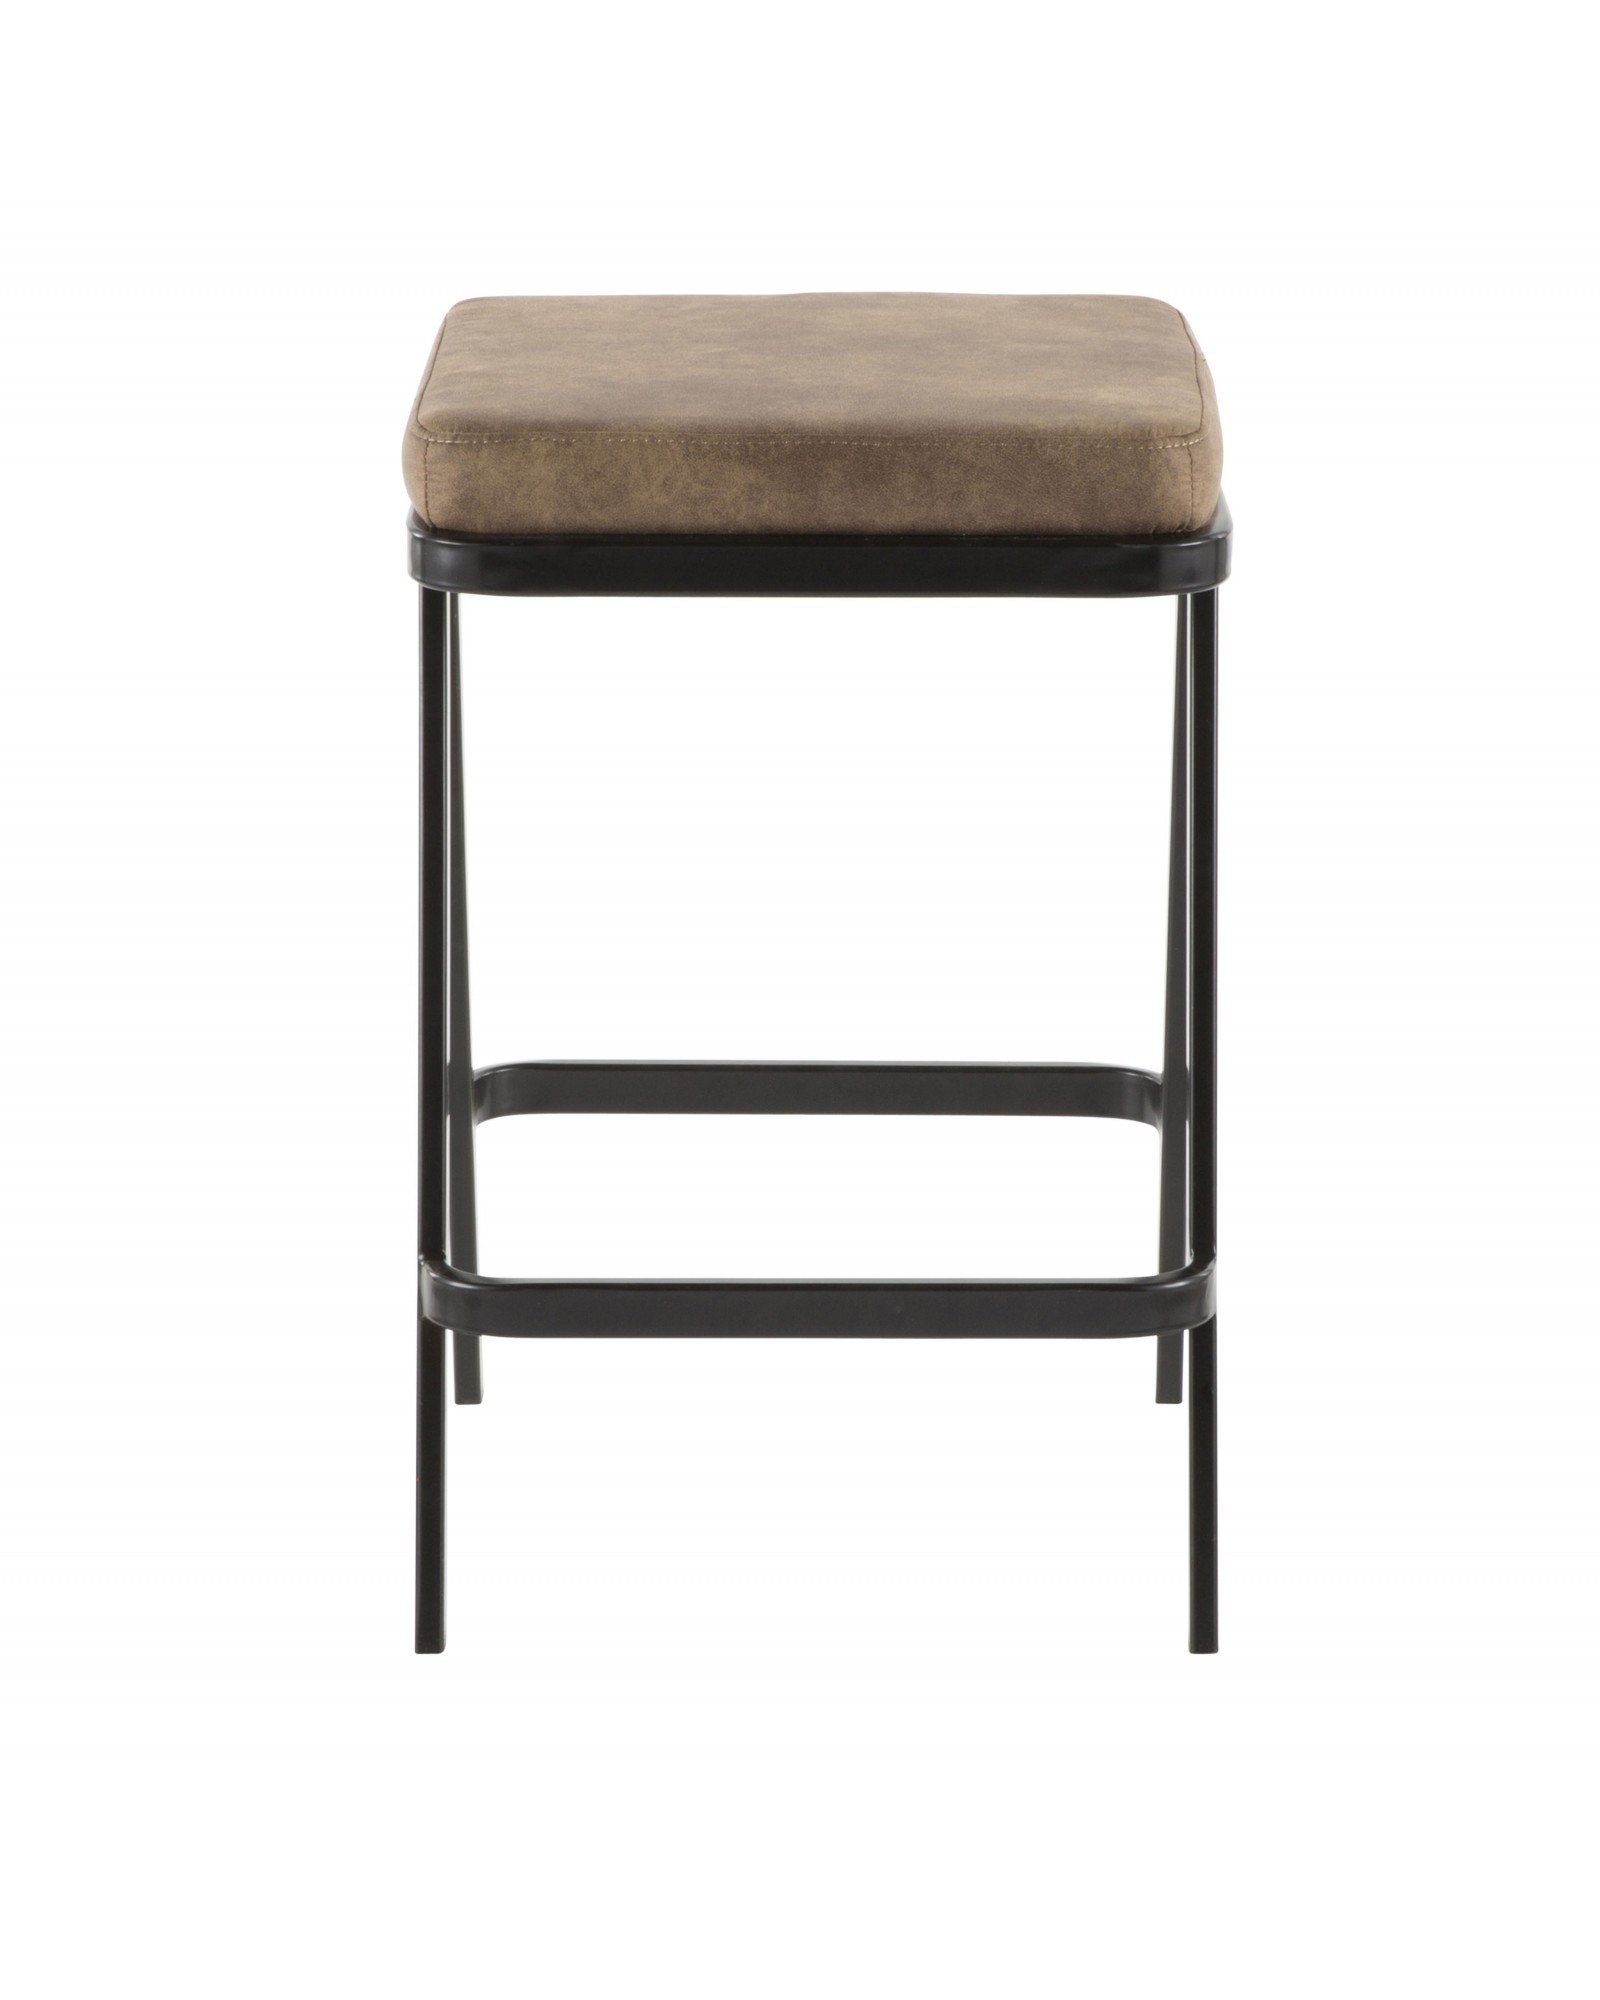 Seven Industrial Counter Stool in Black Metal and Brown Cowboy Fabric